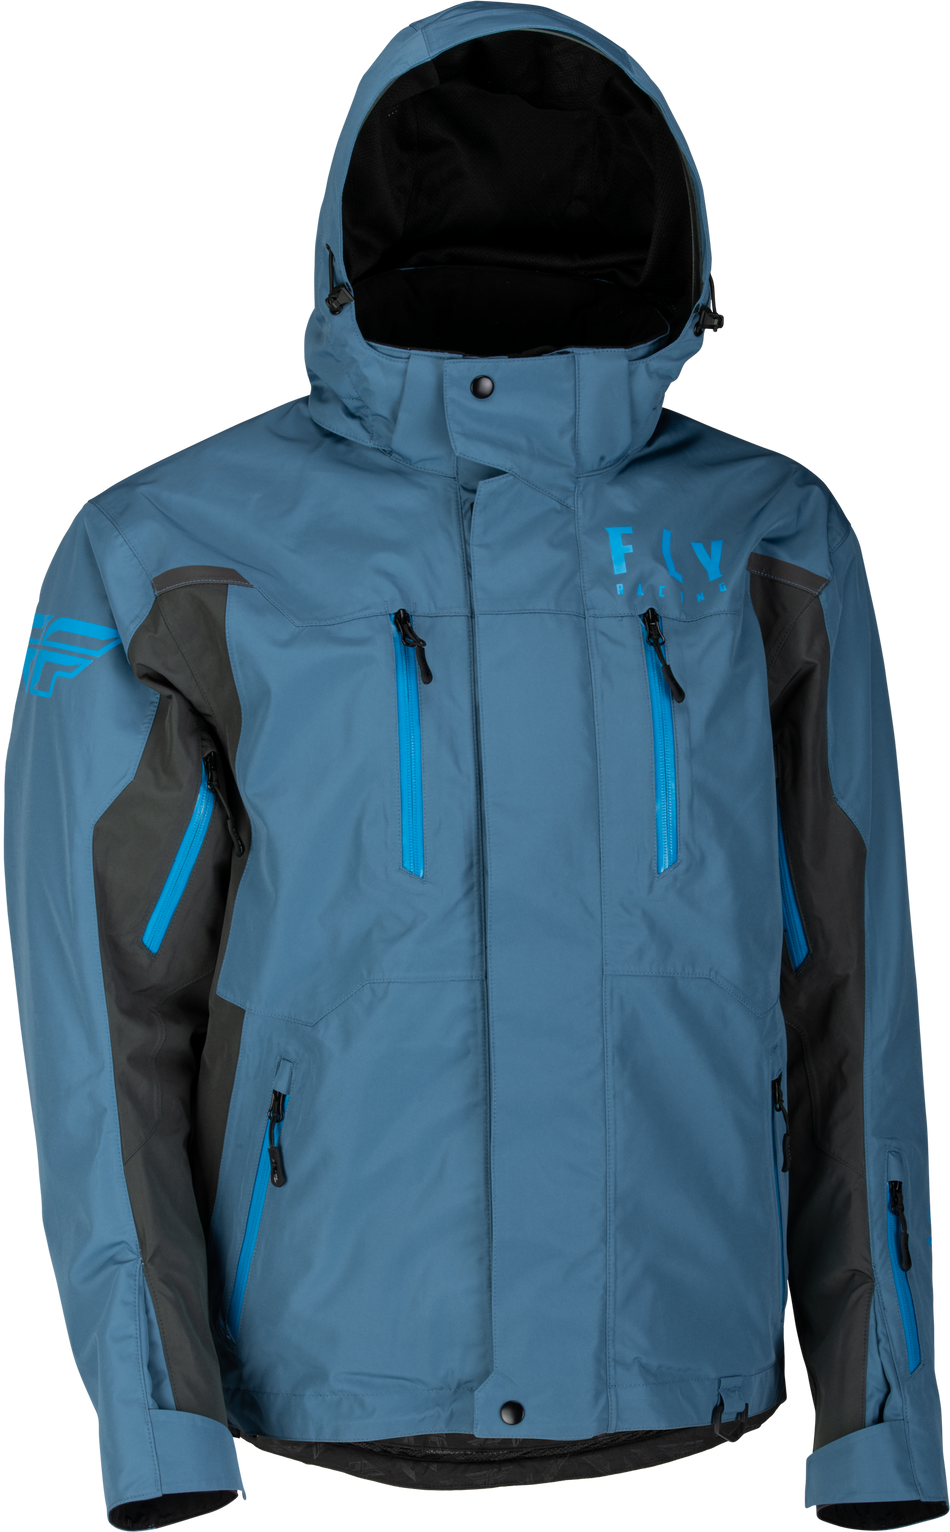 FLY RACING Incline Jacket Blue/Grey Lg 470-4104L